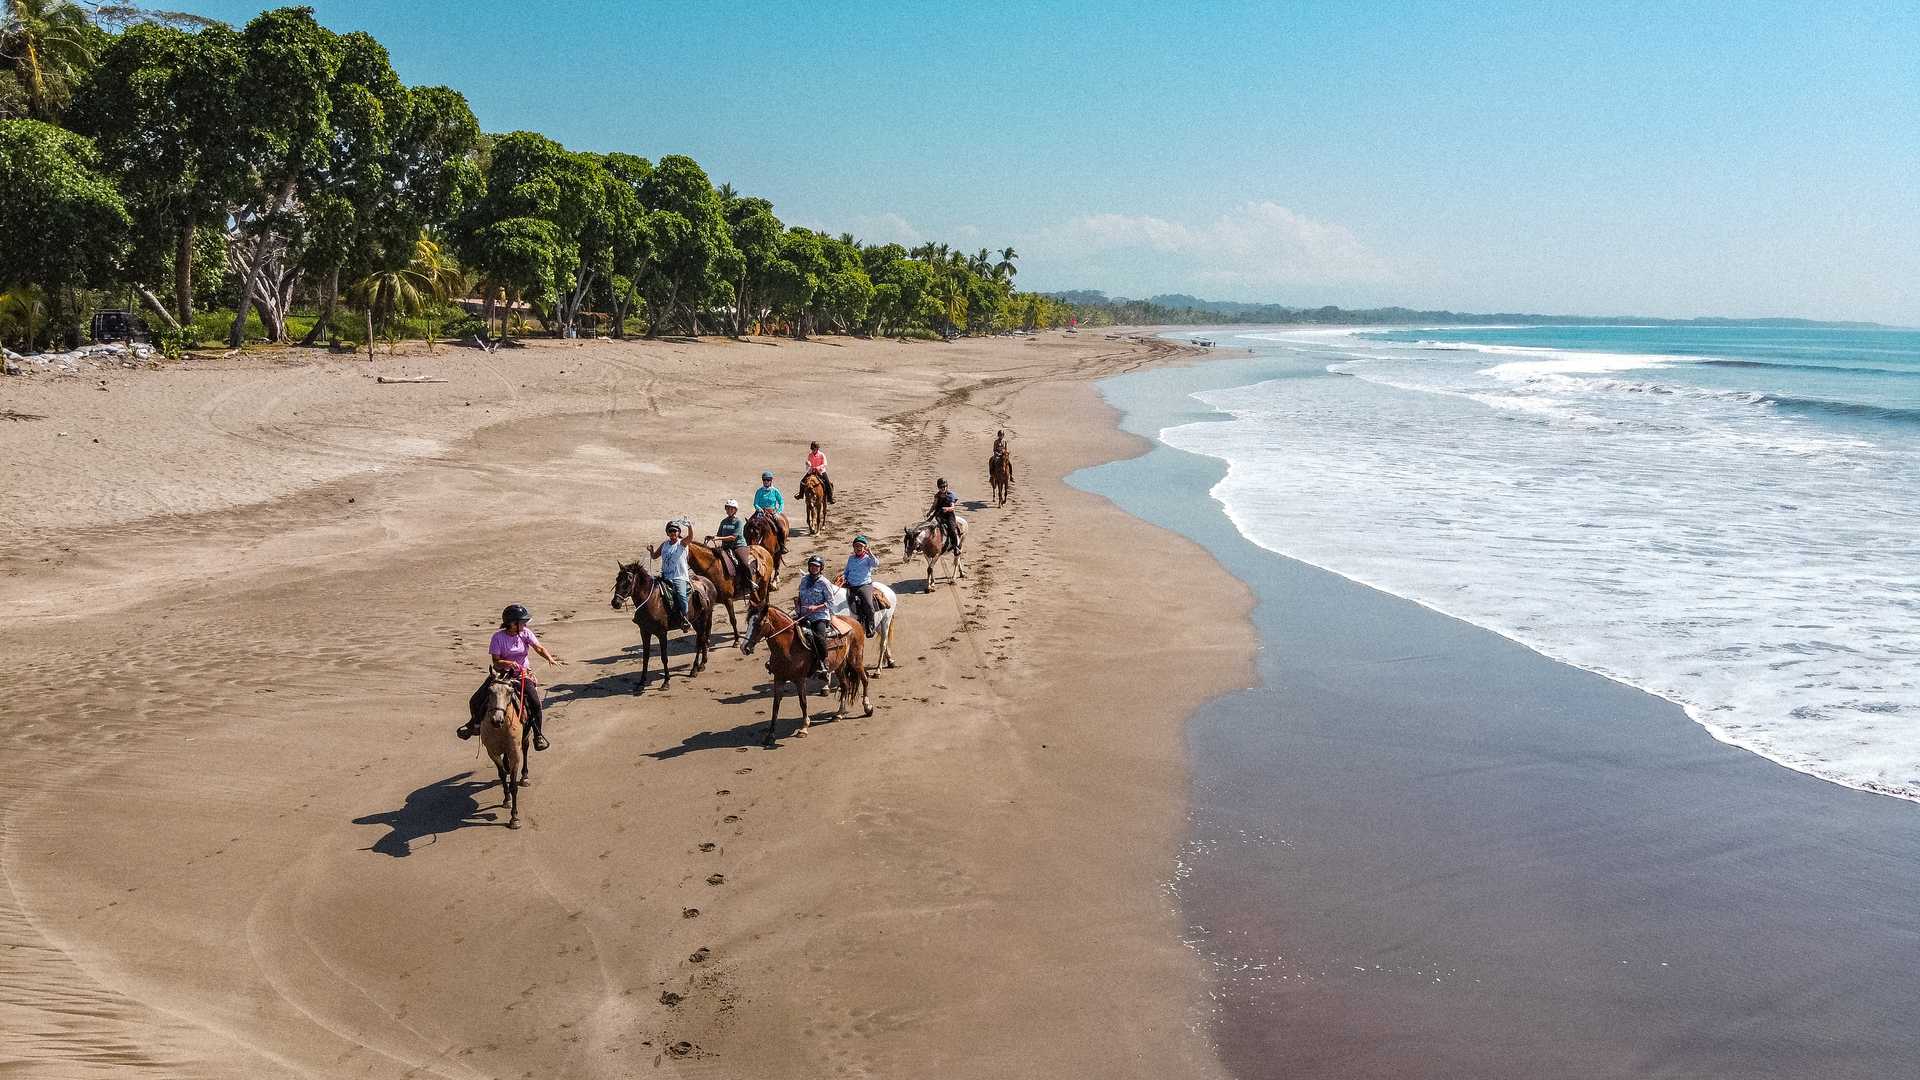 A group of people horseriding at the beach